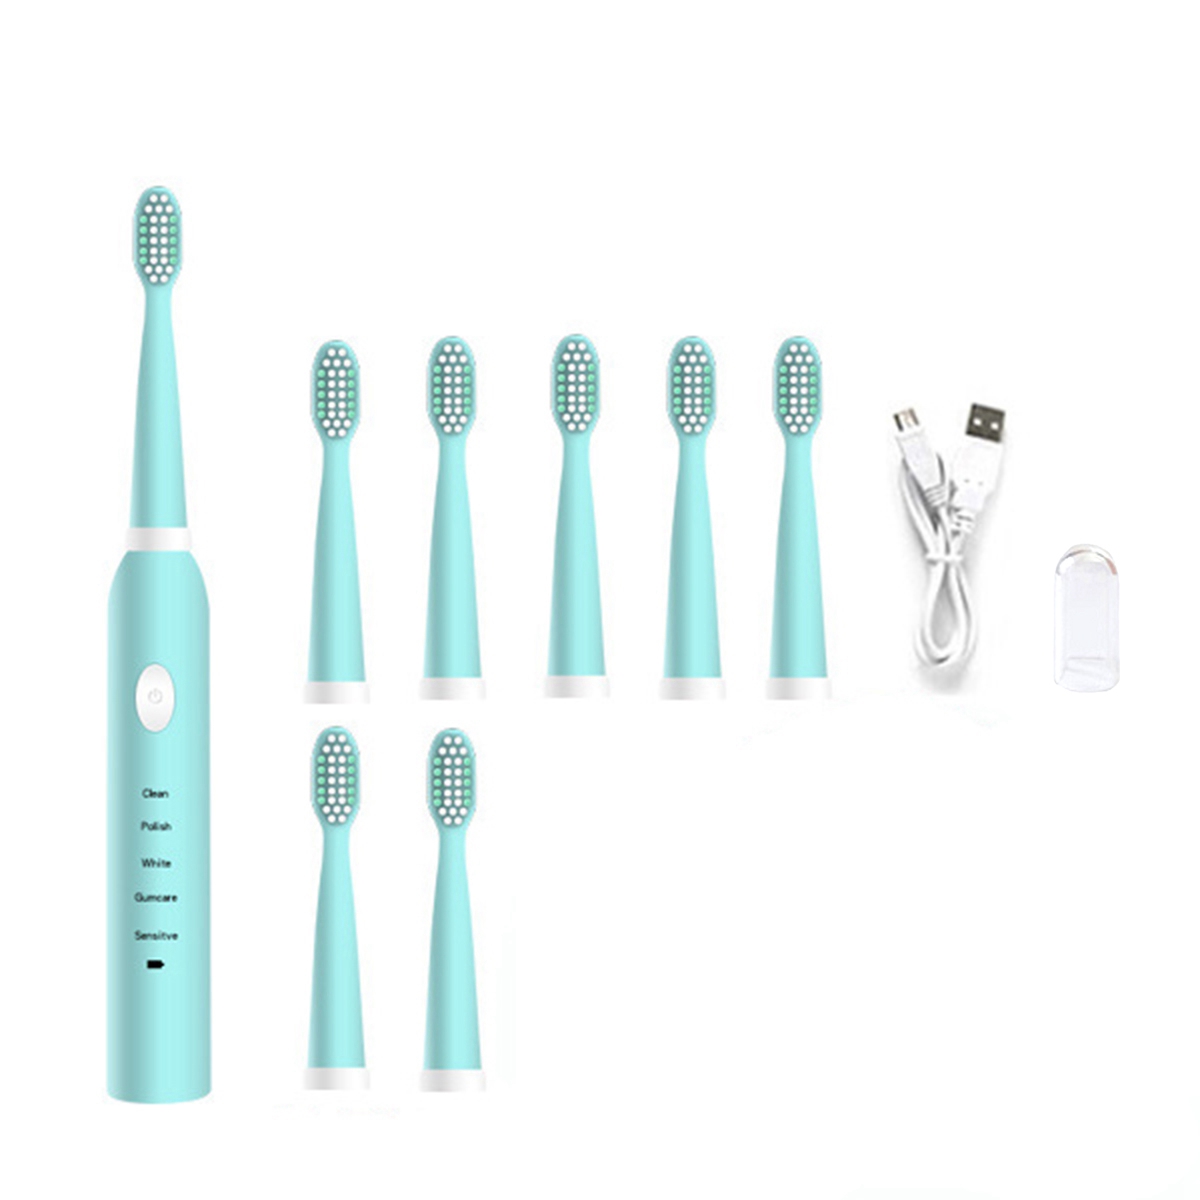 

USB Intelligent Electric Toothbrush Portable Waterpoof Sonic Powerful Vibration Toothbrush Soft Brush Tooth Cleaner for